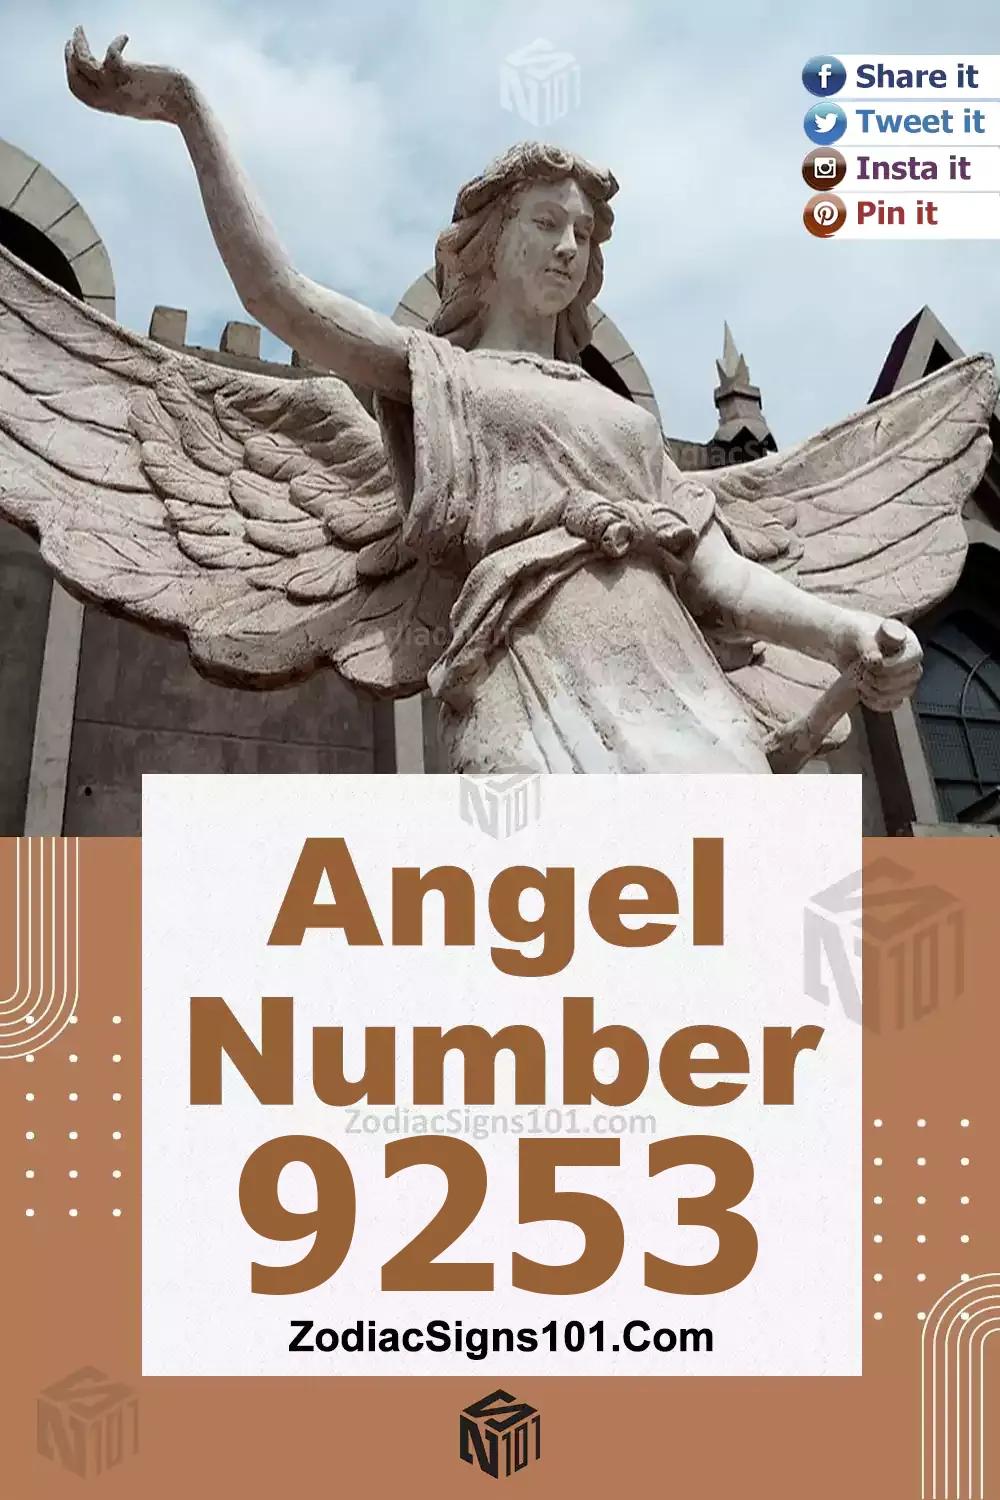 9253 Angel Number Meaning